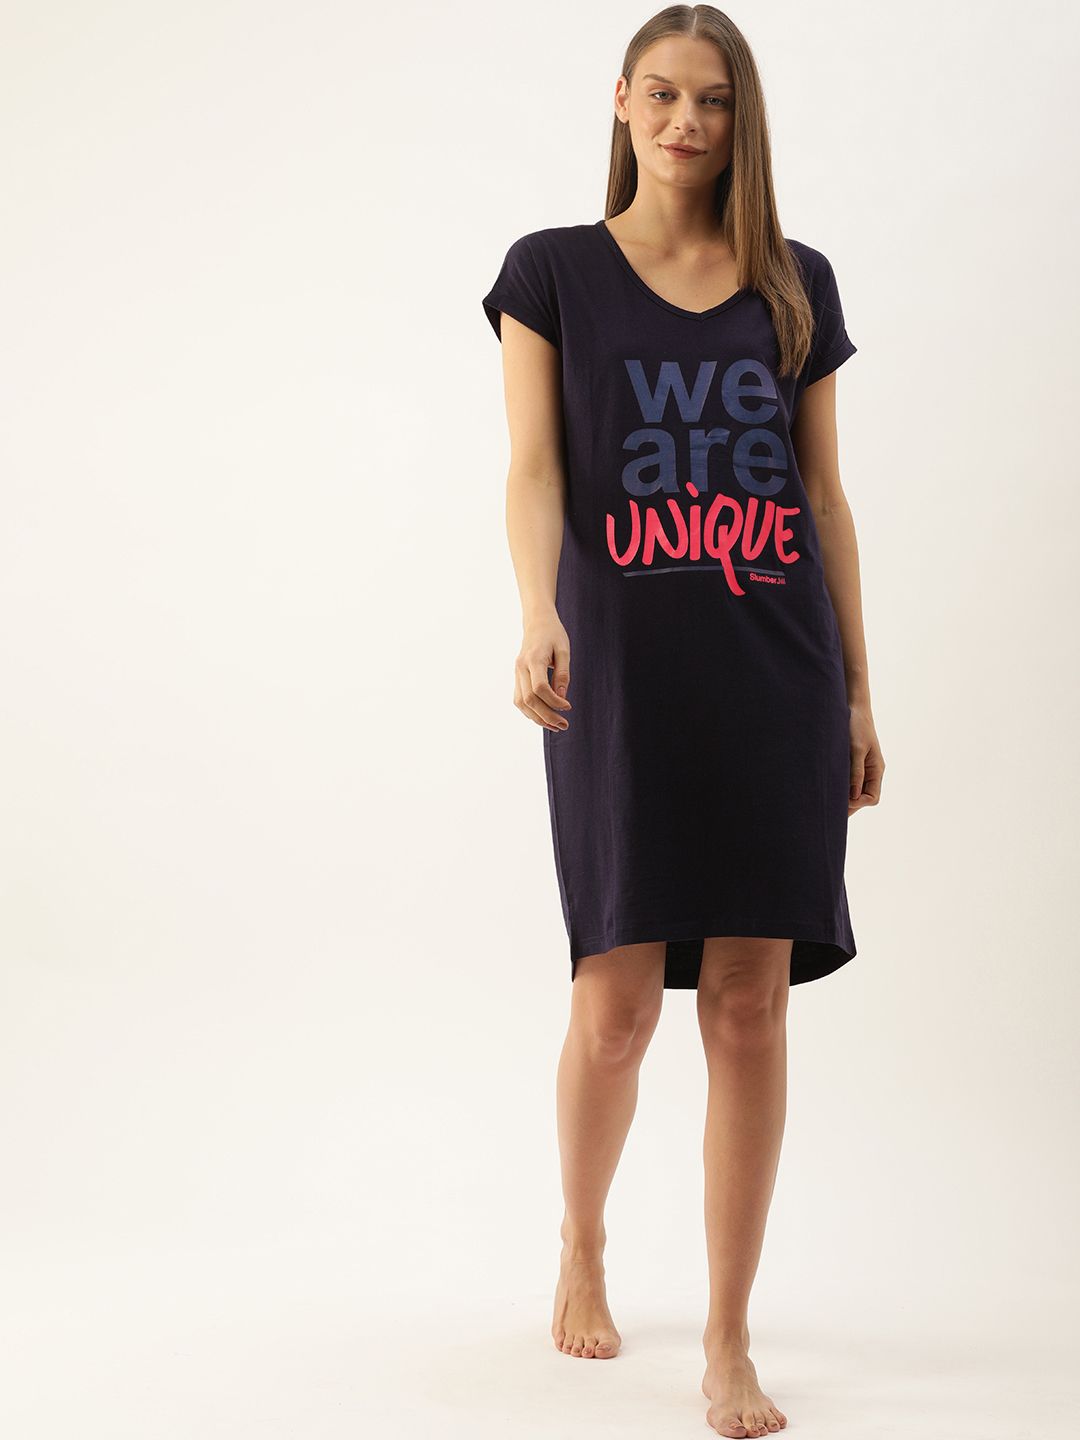 Loose Fit "We are Unique" Sleep Shirt - Colour Navy